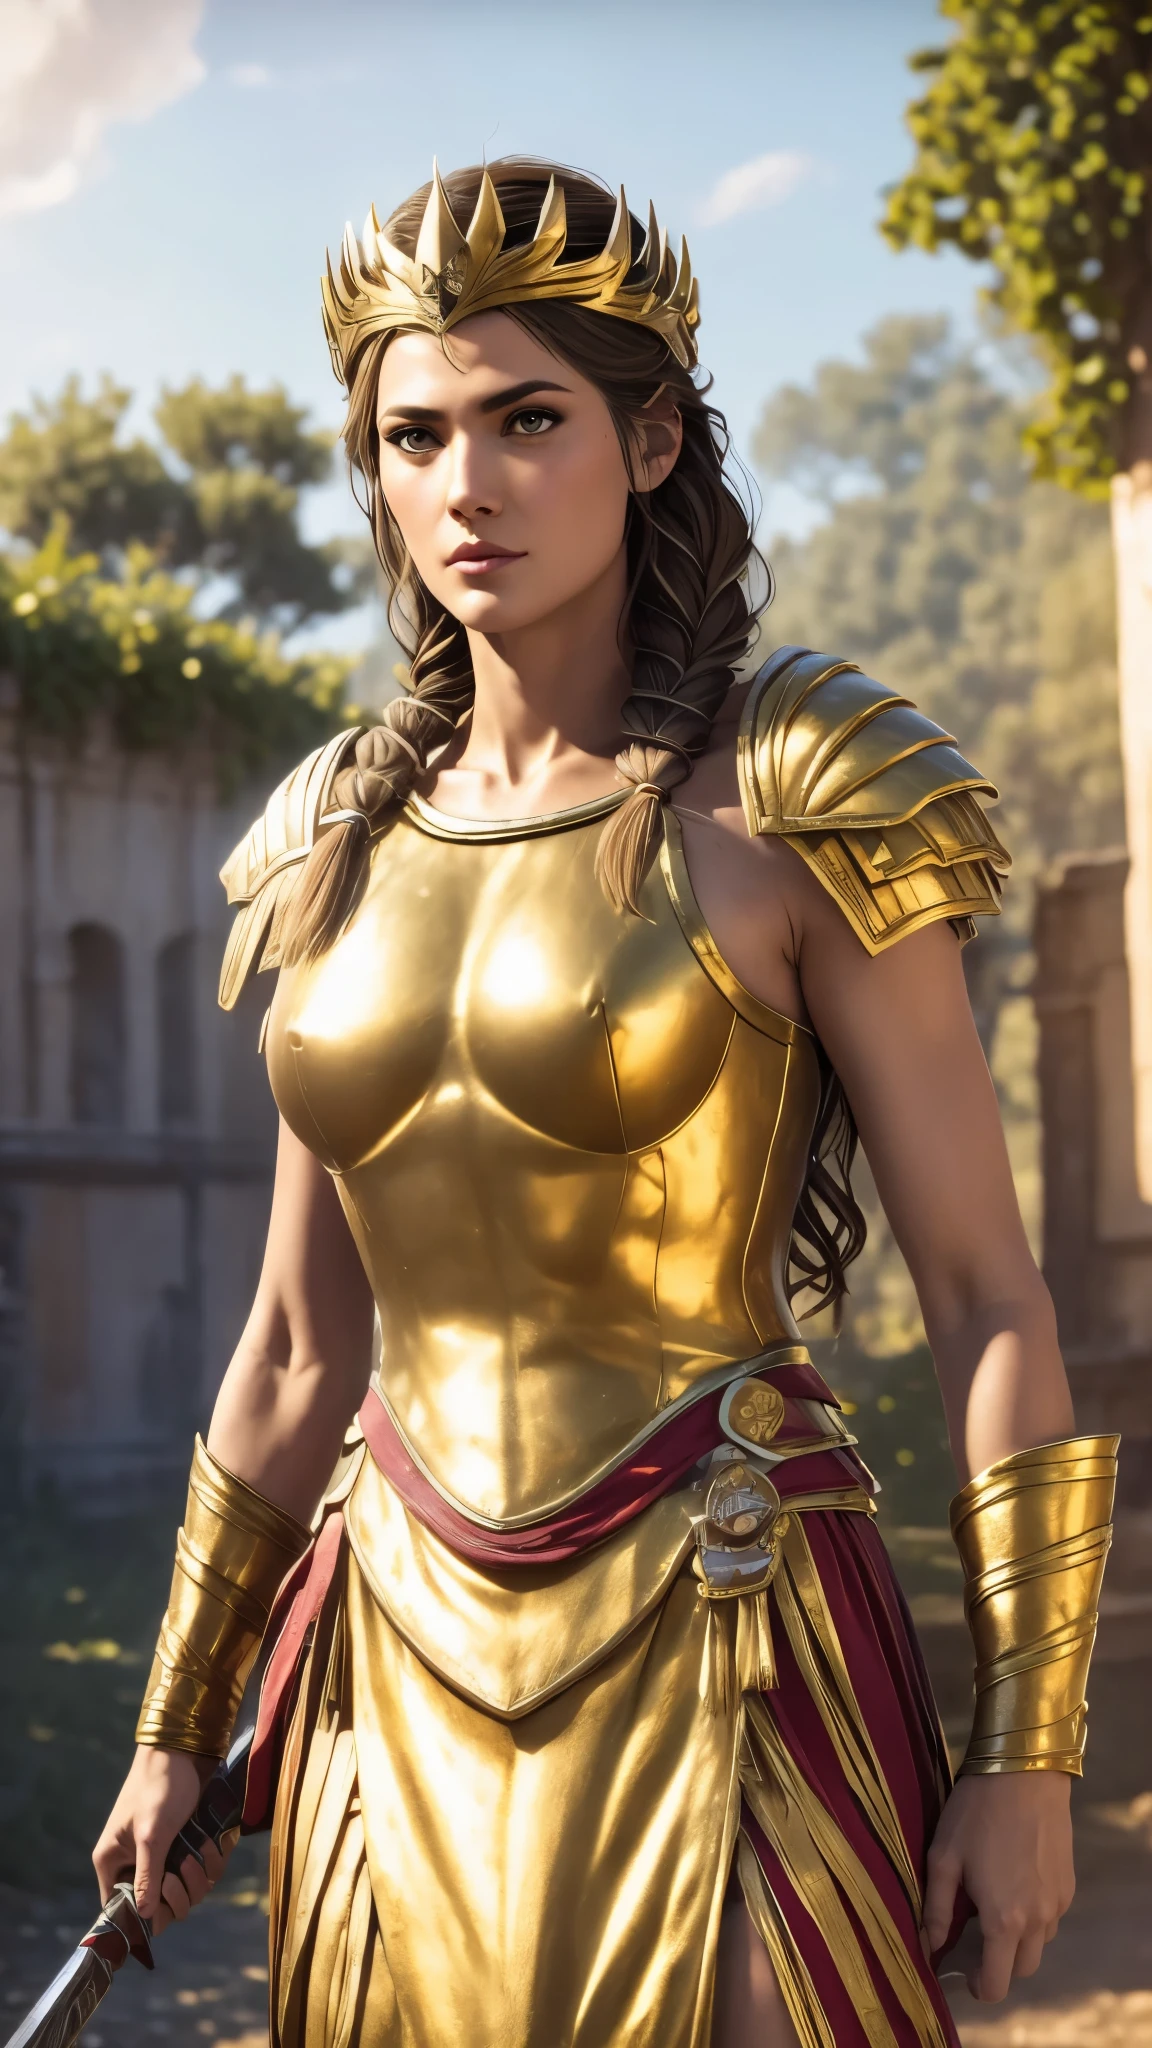 Kassandra, masterpiece,8k,ultra-detailed,best quality,battlefield,(background:the warriors are fighting,red warriors,green warriors,jumping,hack,slash),(middle ground:queens are fighting,blonde hair queen,brunette hair queen,Park Bo-young,Fighting Pose),The lighting is dark and gloomy,exquisite golden armor,exquisite golden crown,exquisitely carved silver sword,exquisitely eagle helmet.